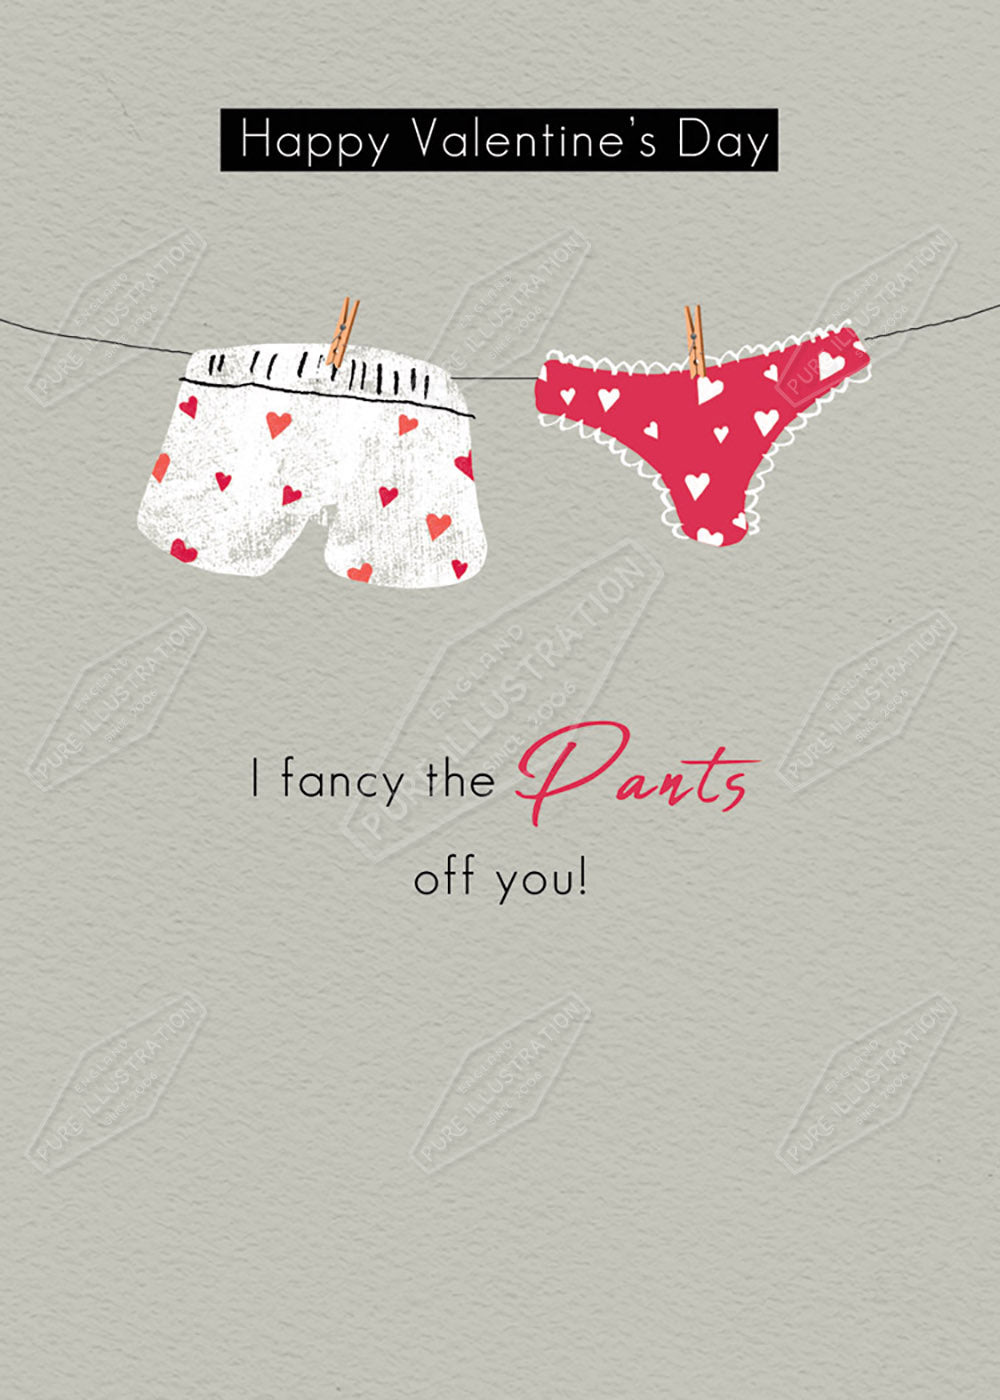 Valentines Pants Message Greeting Card Design by Cory Reid for Pure Art Licensing Agency & Surface Design Studio